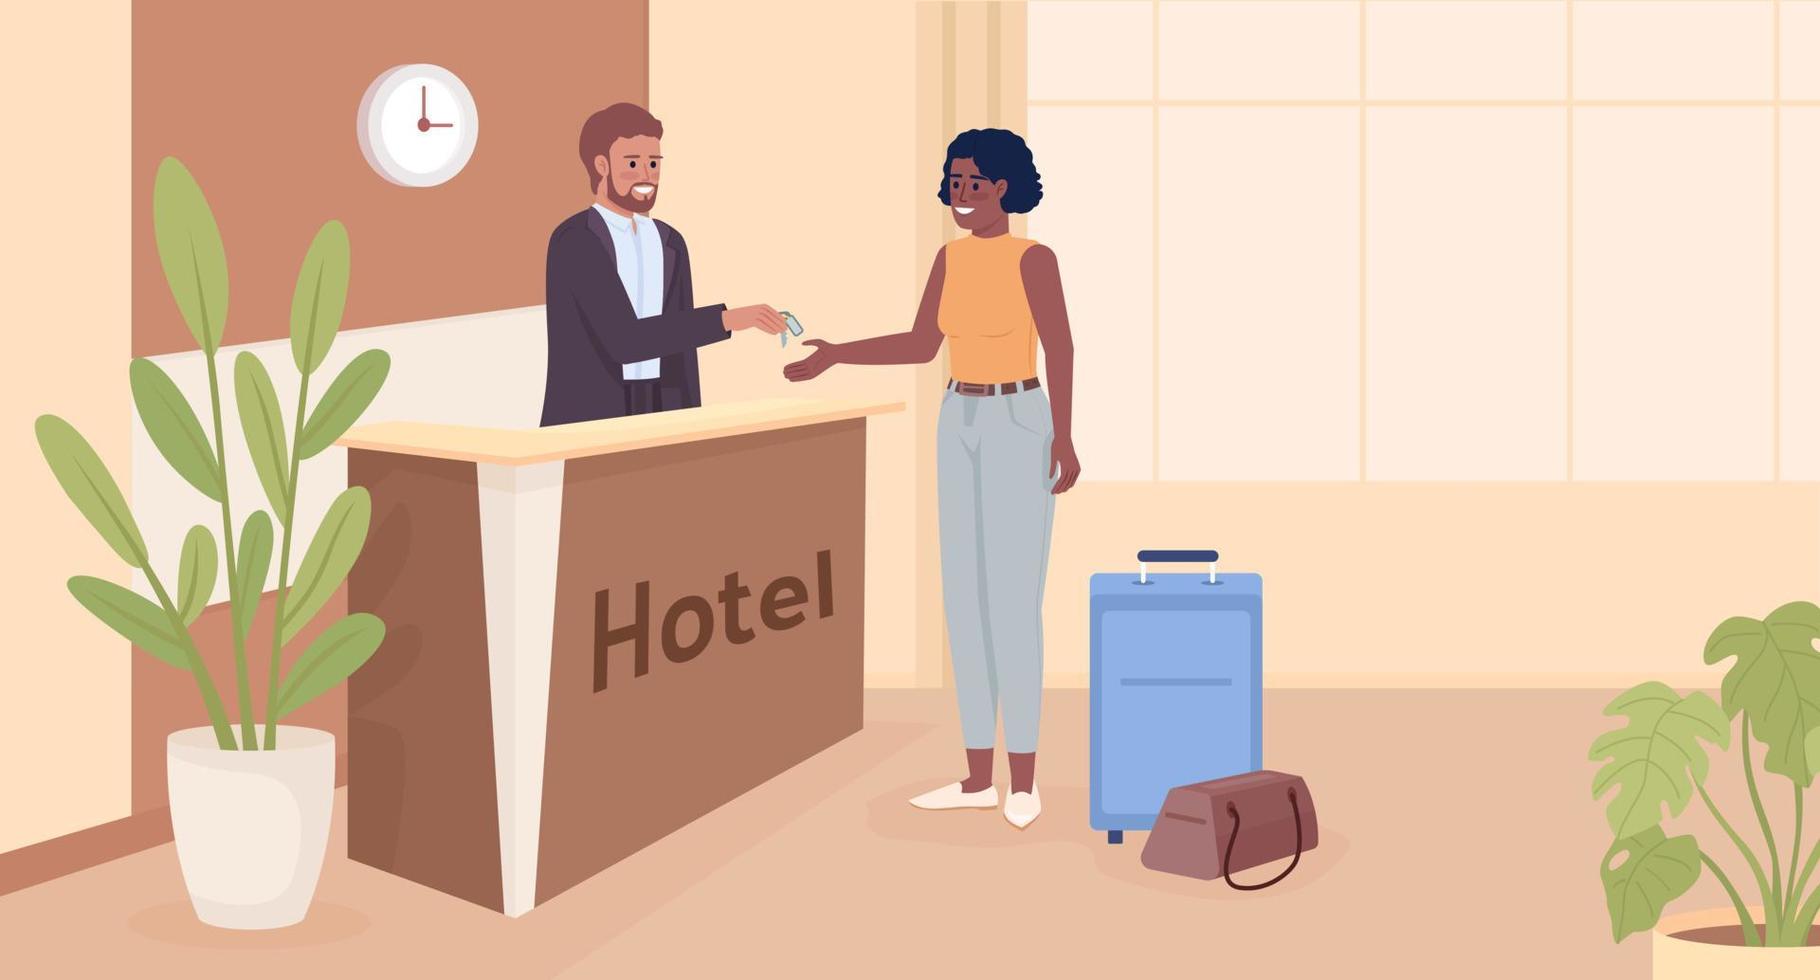 Hotel arrival flat color vector illustration. Booking room in hostel. Receptionist greeting new guest. Fully editable 2D simple cartoon characters with waiting room interior on background